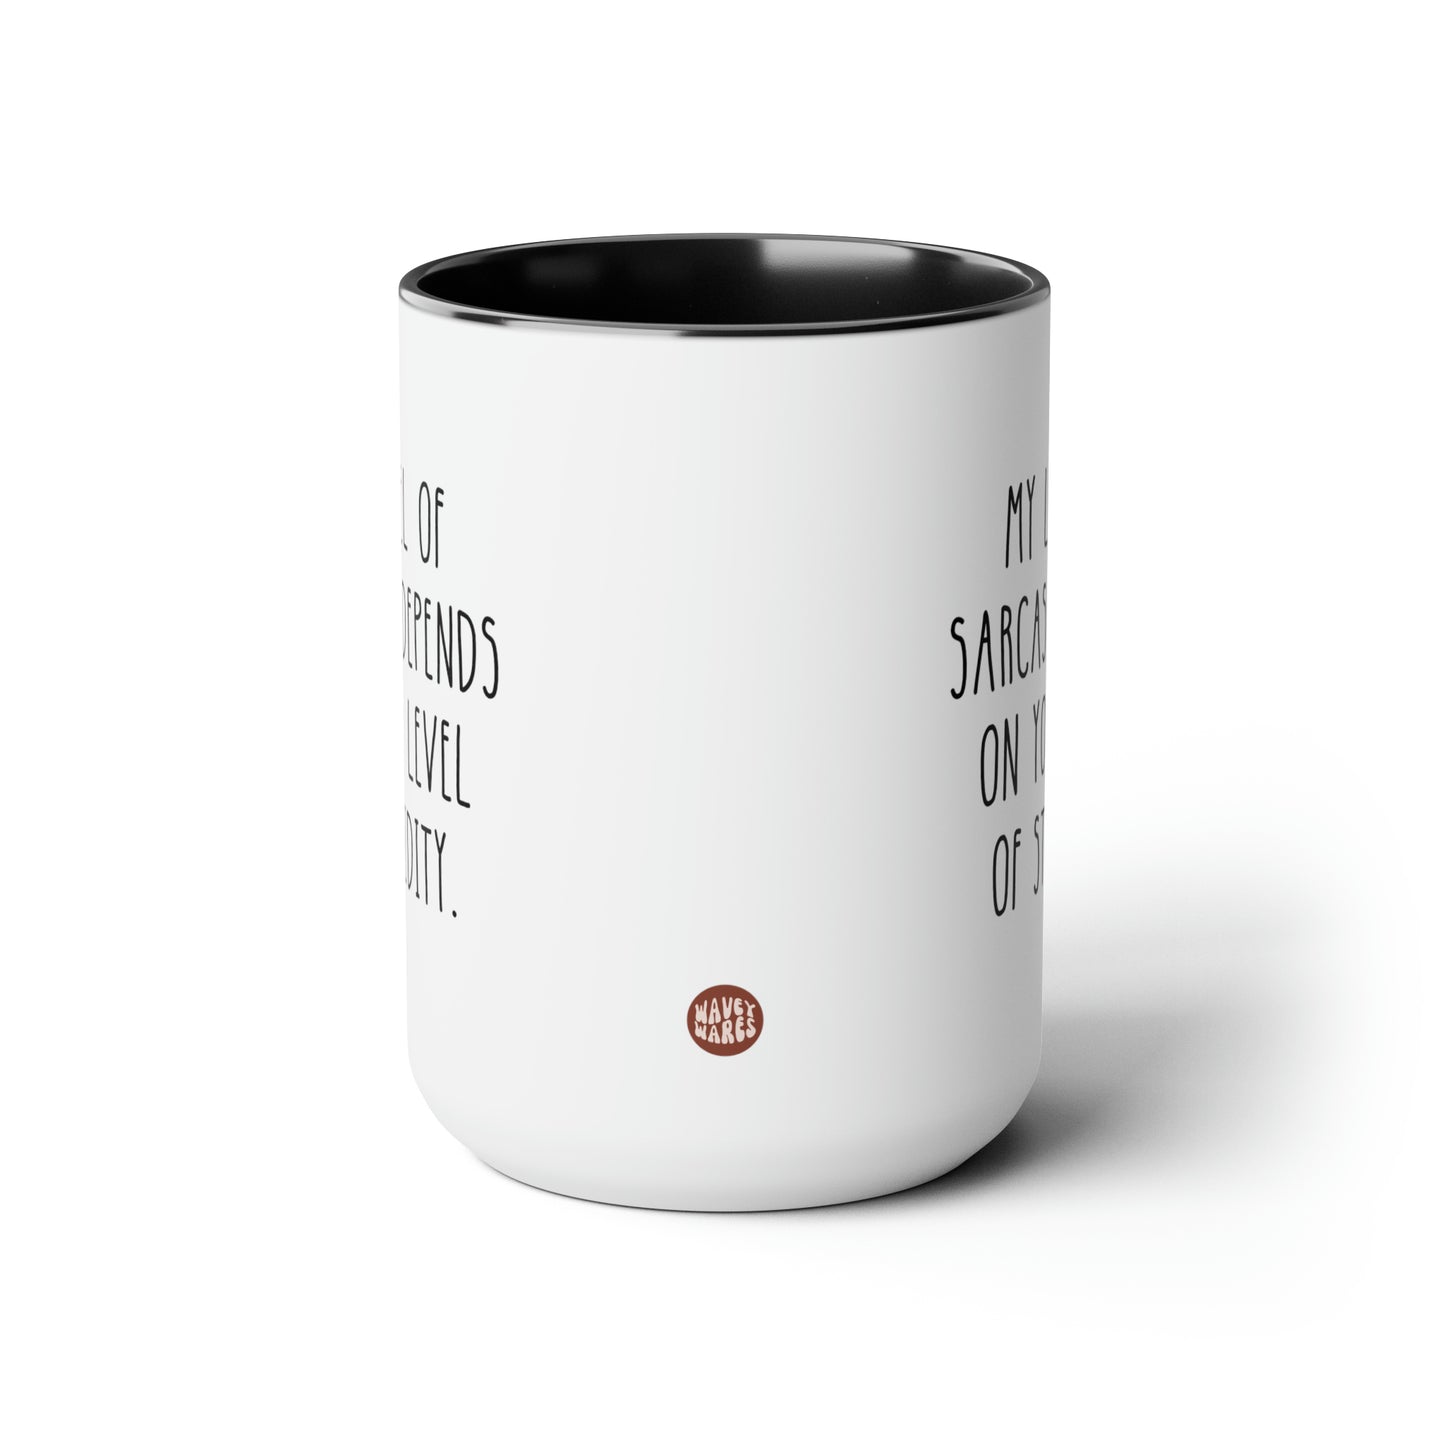 My Level Of Sarcasm Depends On Your Level Of Stupidity 15oz white with black accent funny large coffee mug gift novelty ceramic cup sarcastic waveywares wavey wares wavywares wavy wares side